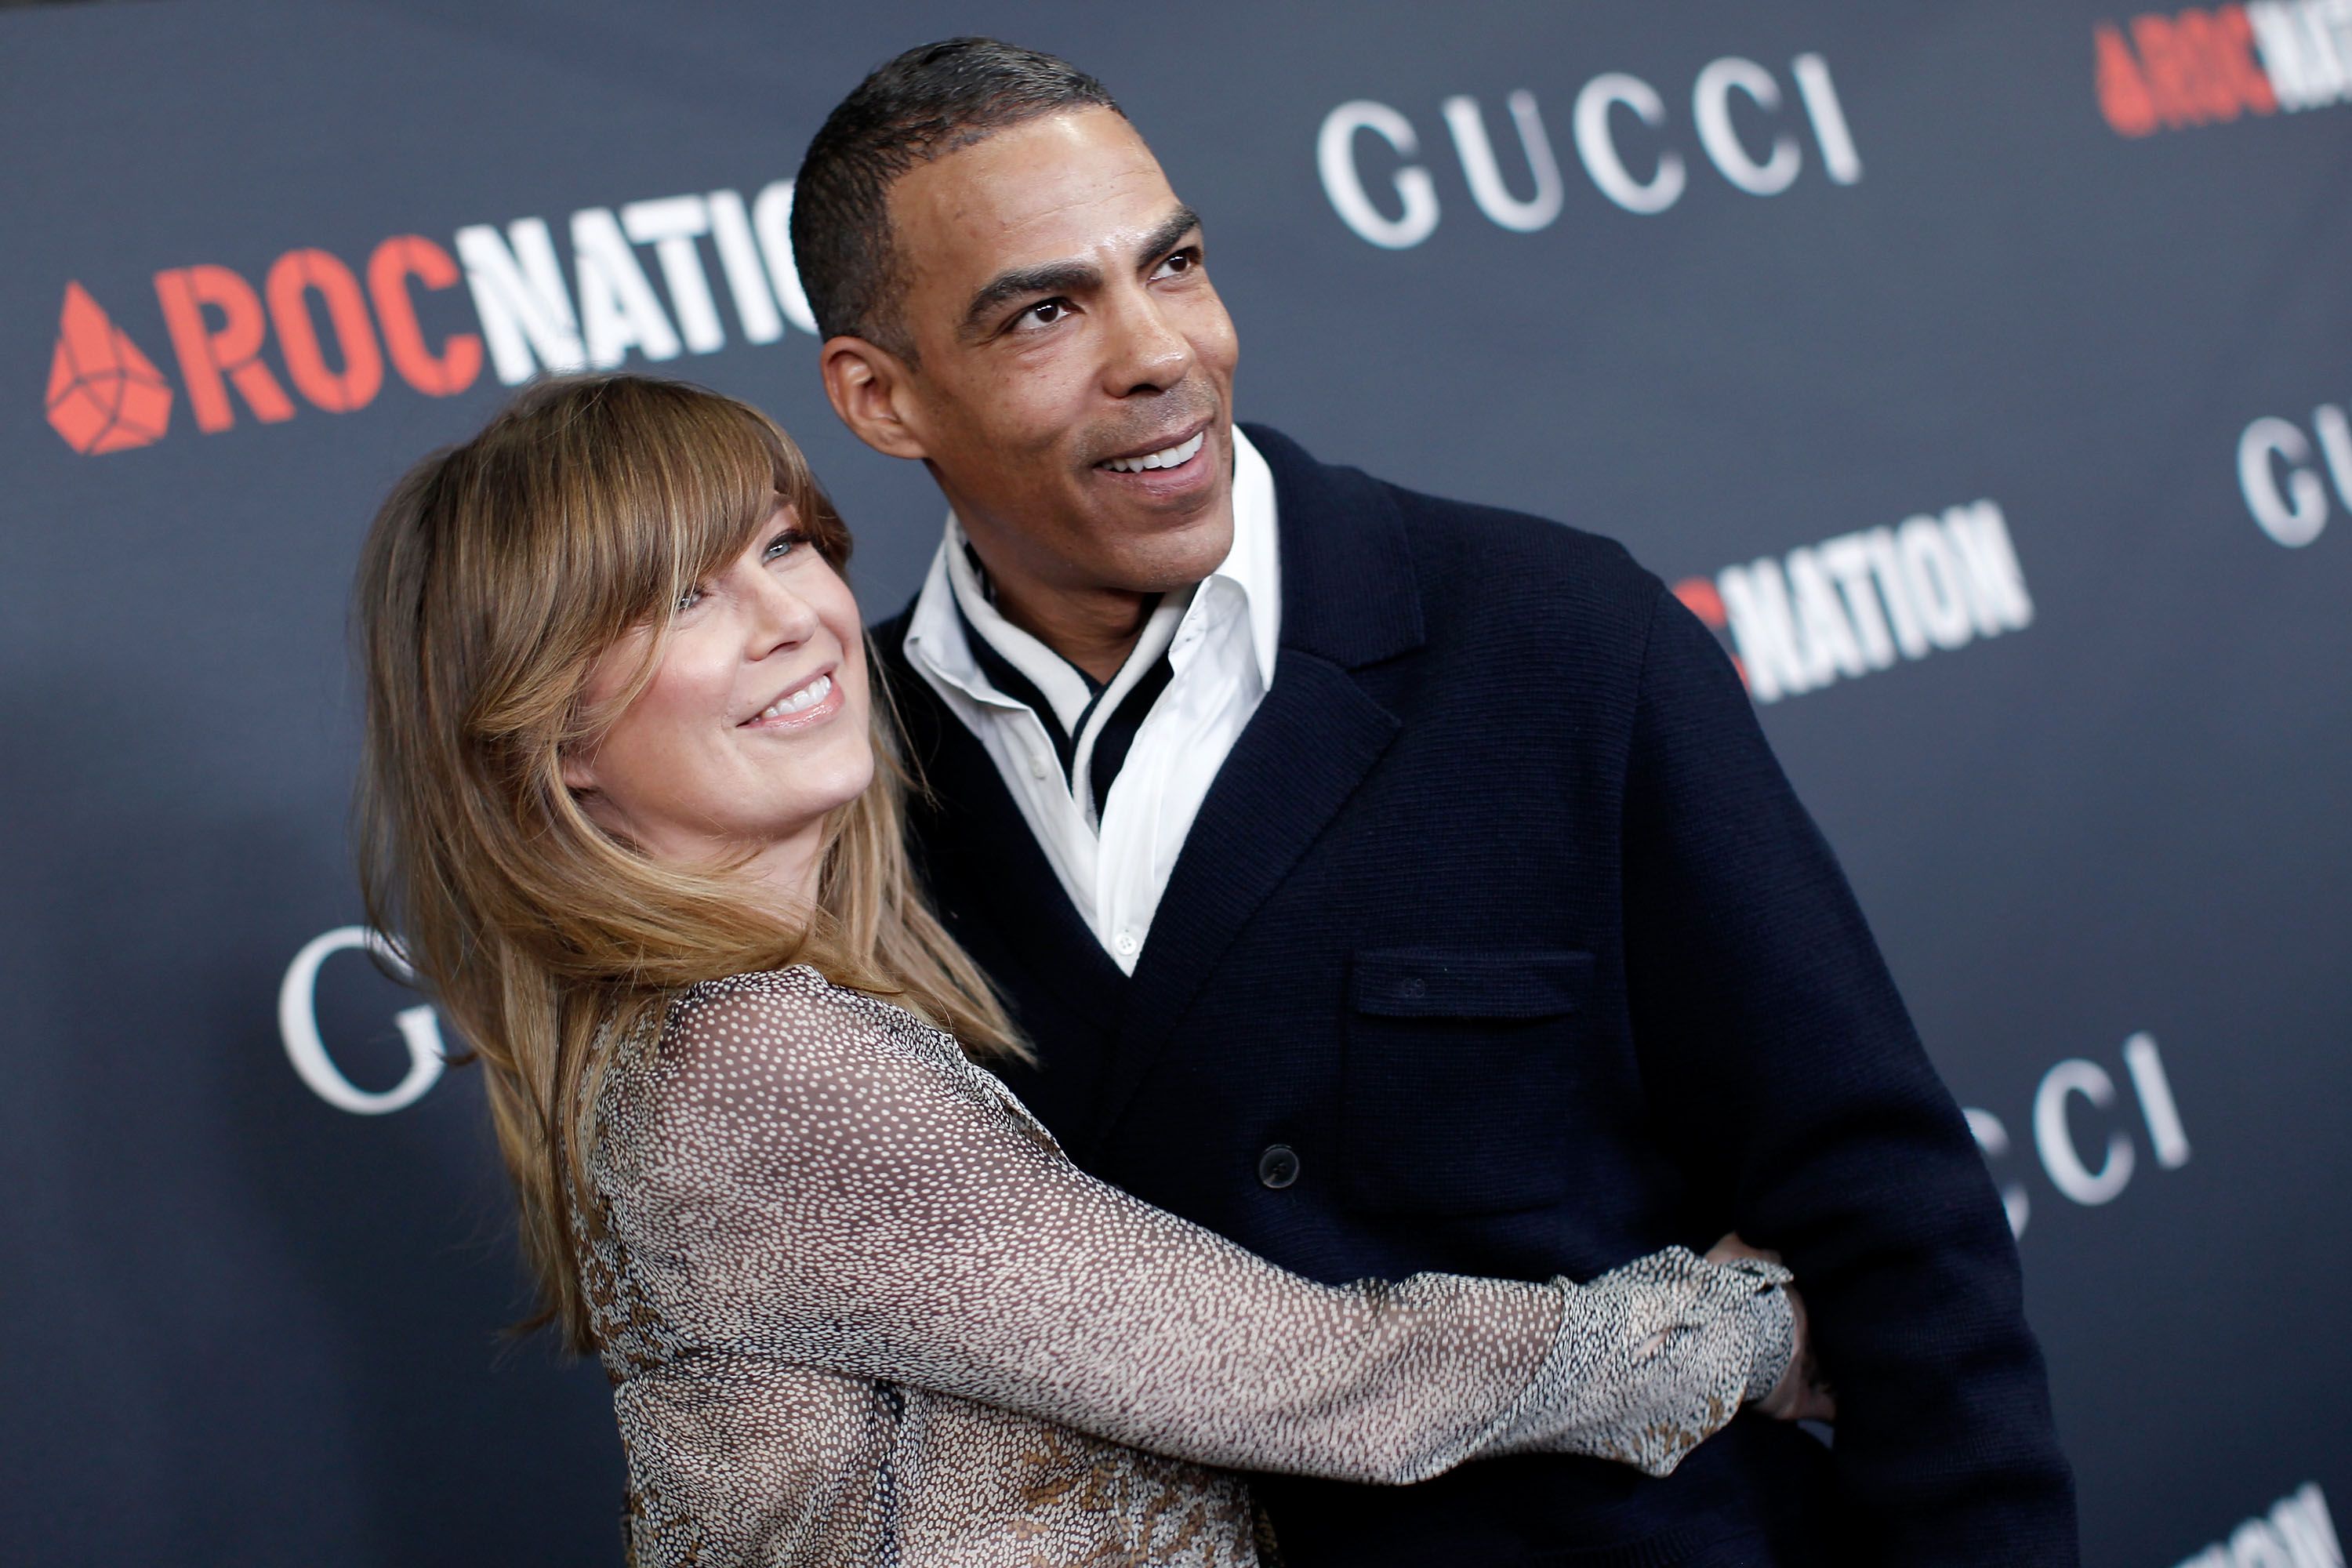 Ellen Pompeo and Chris Ivery at the Gucci and RocNation Pre-Grammy brunch on February 12, 2011, in West Hollywood, California | Photo: Christopher Polk/Getty Images